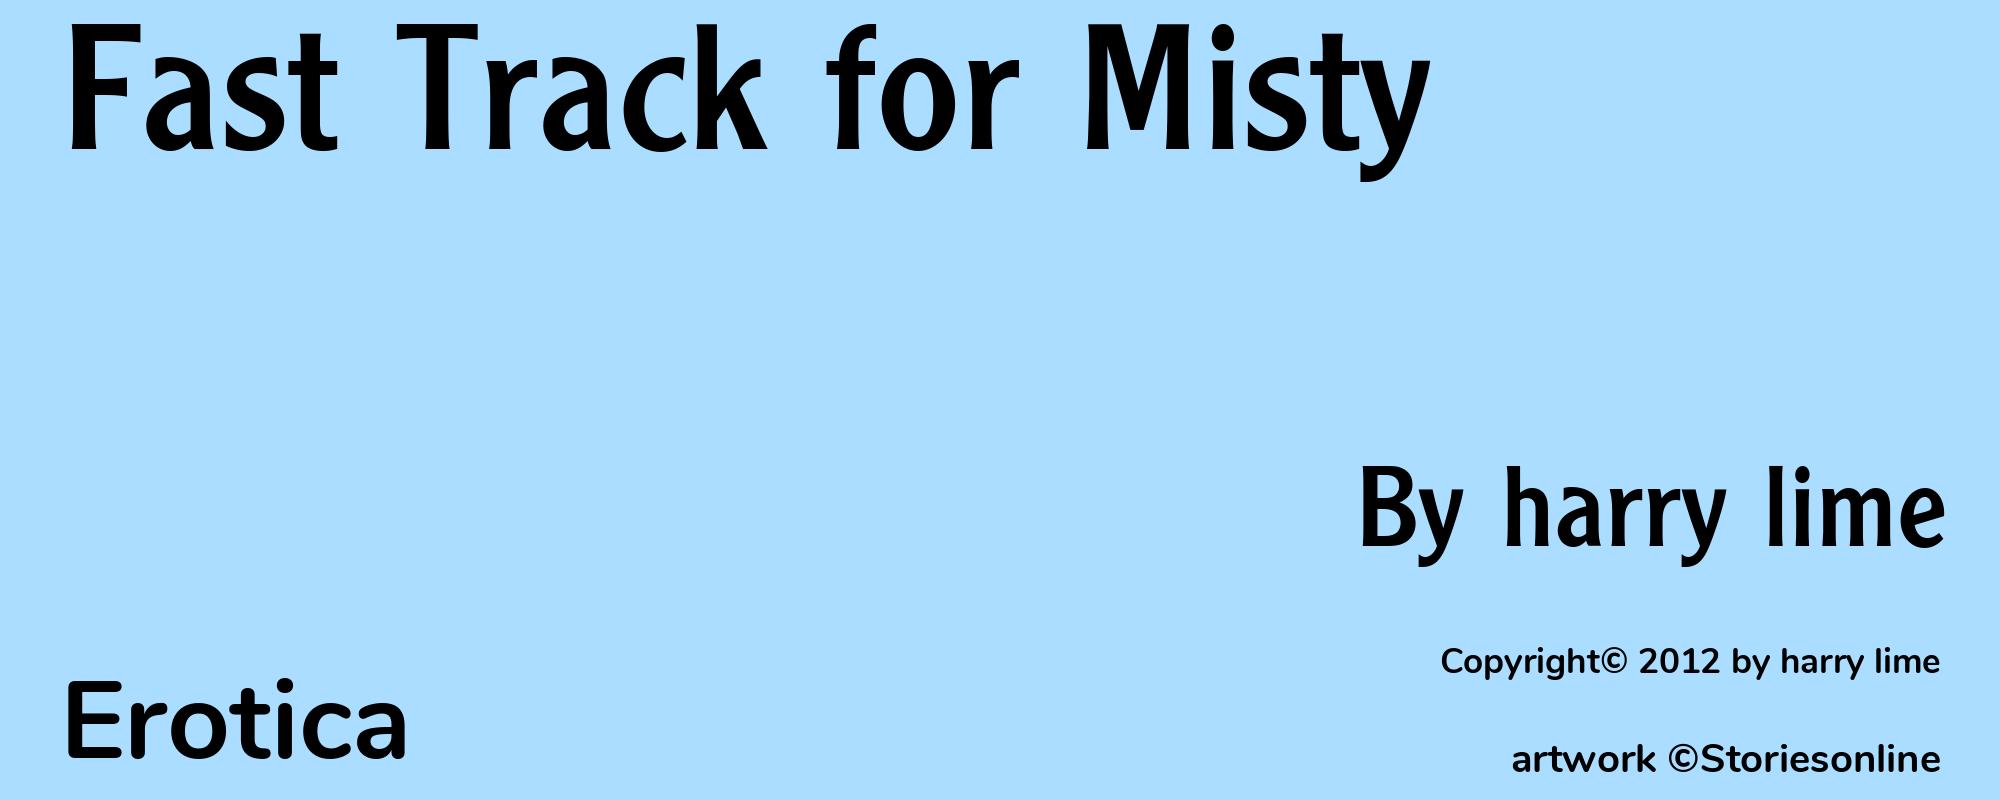 Fast Track for Misty - Cover